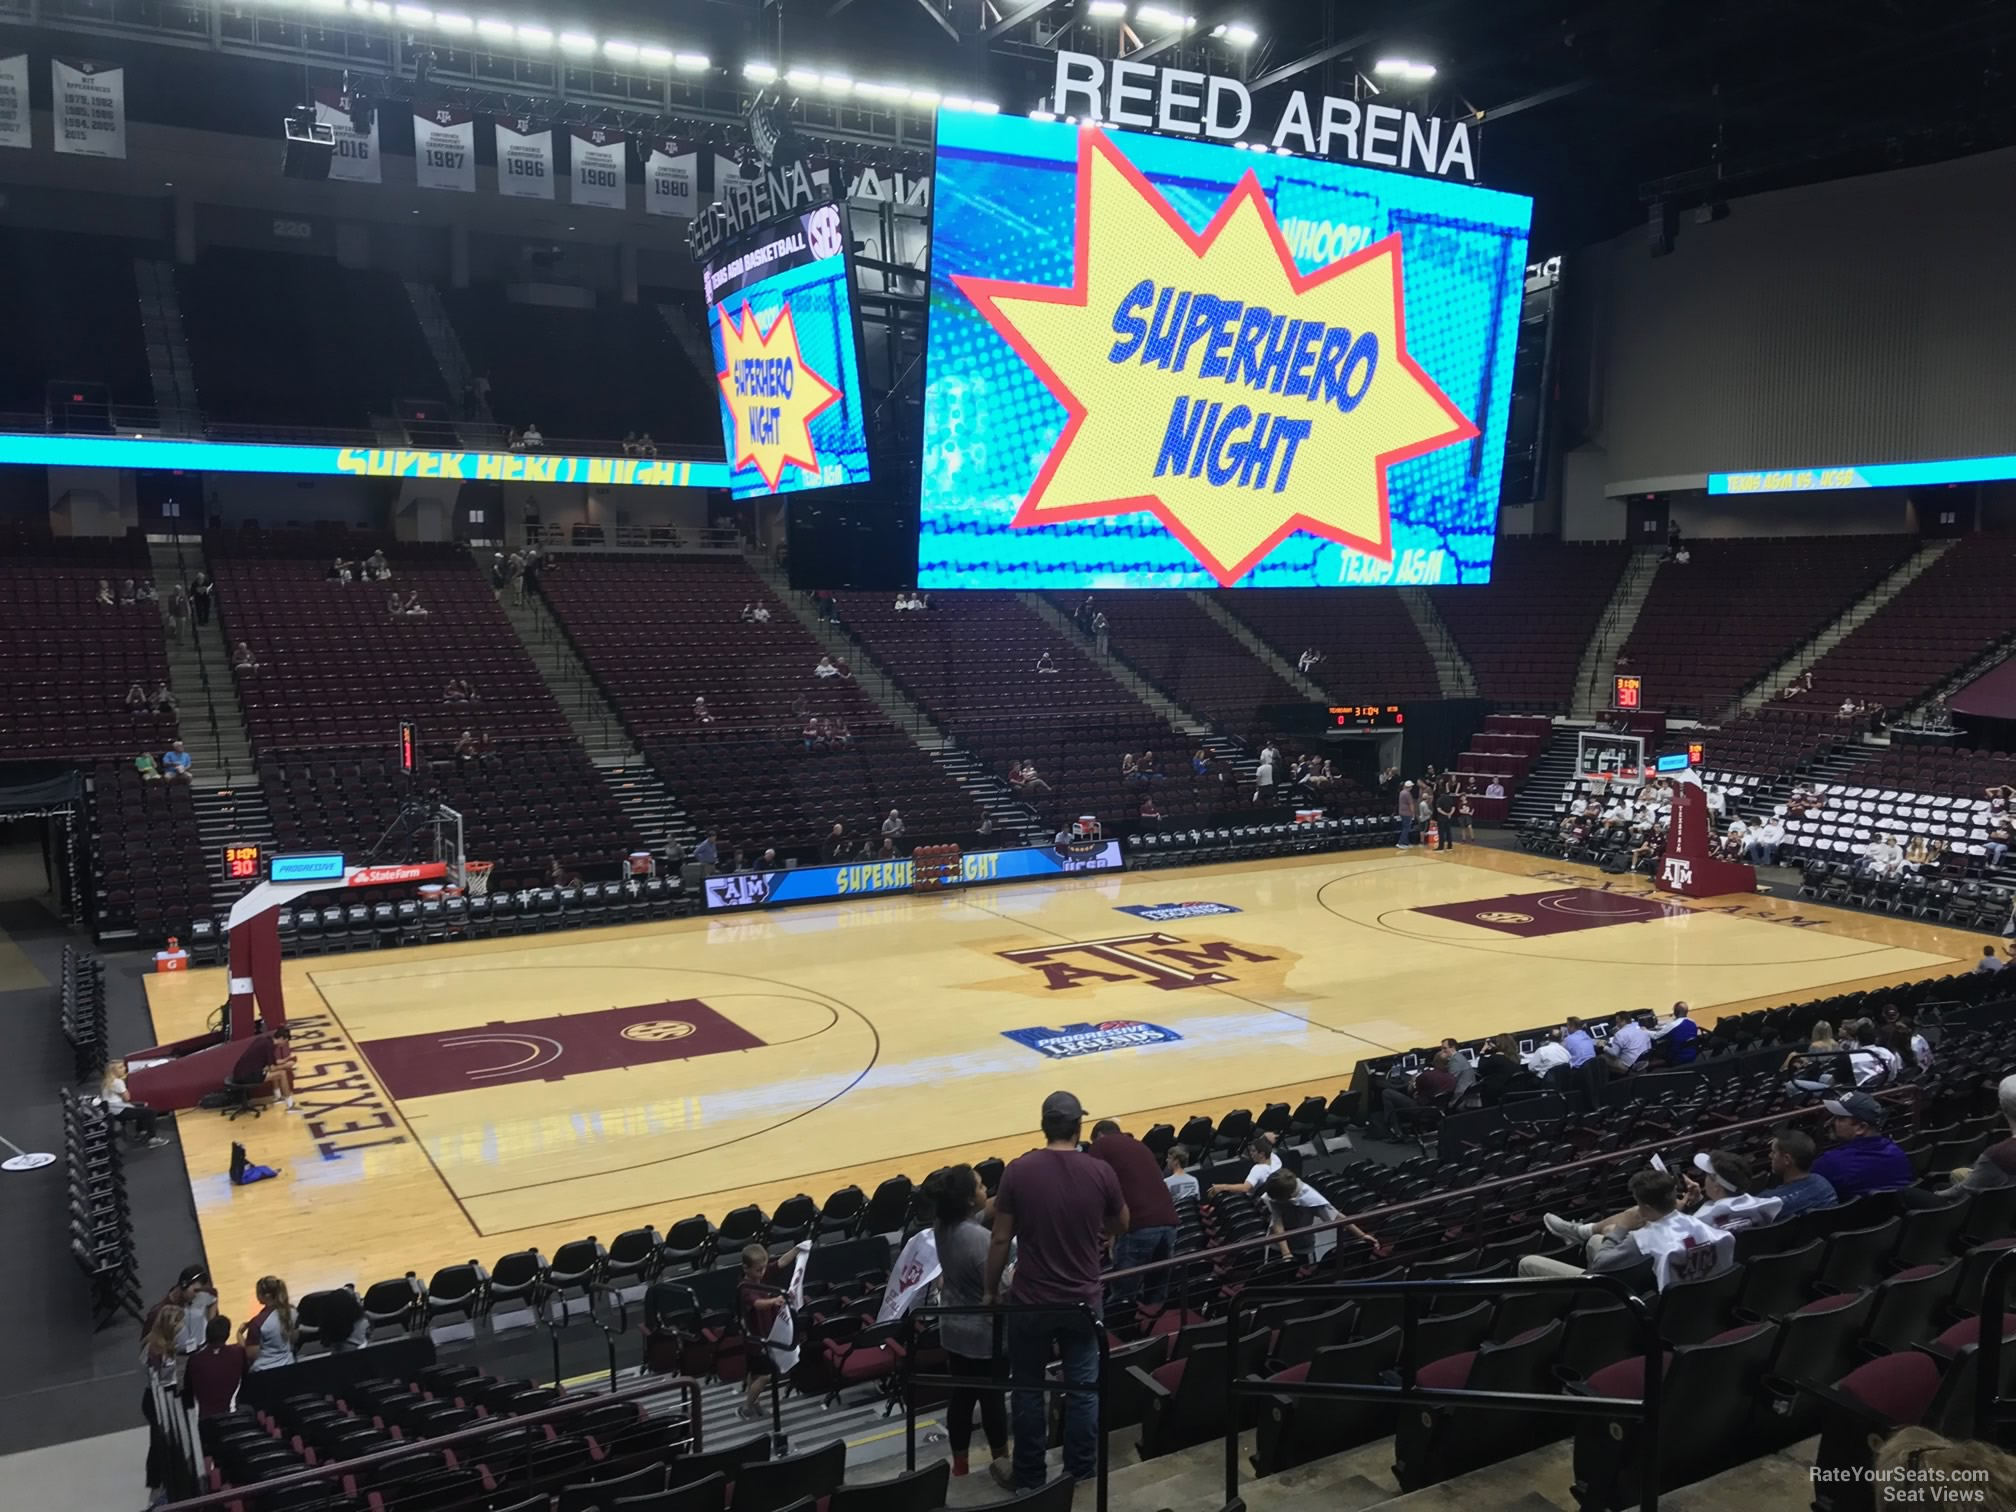 section 107, row j seat view  - reed arena